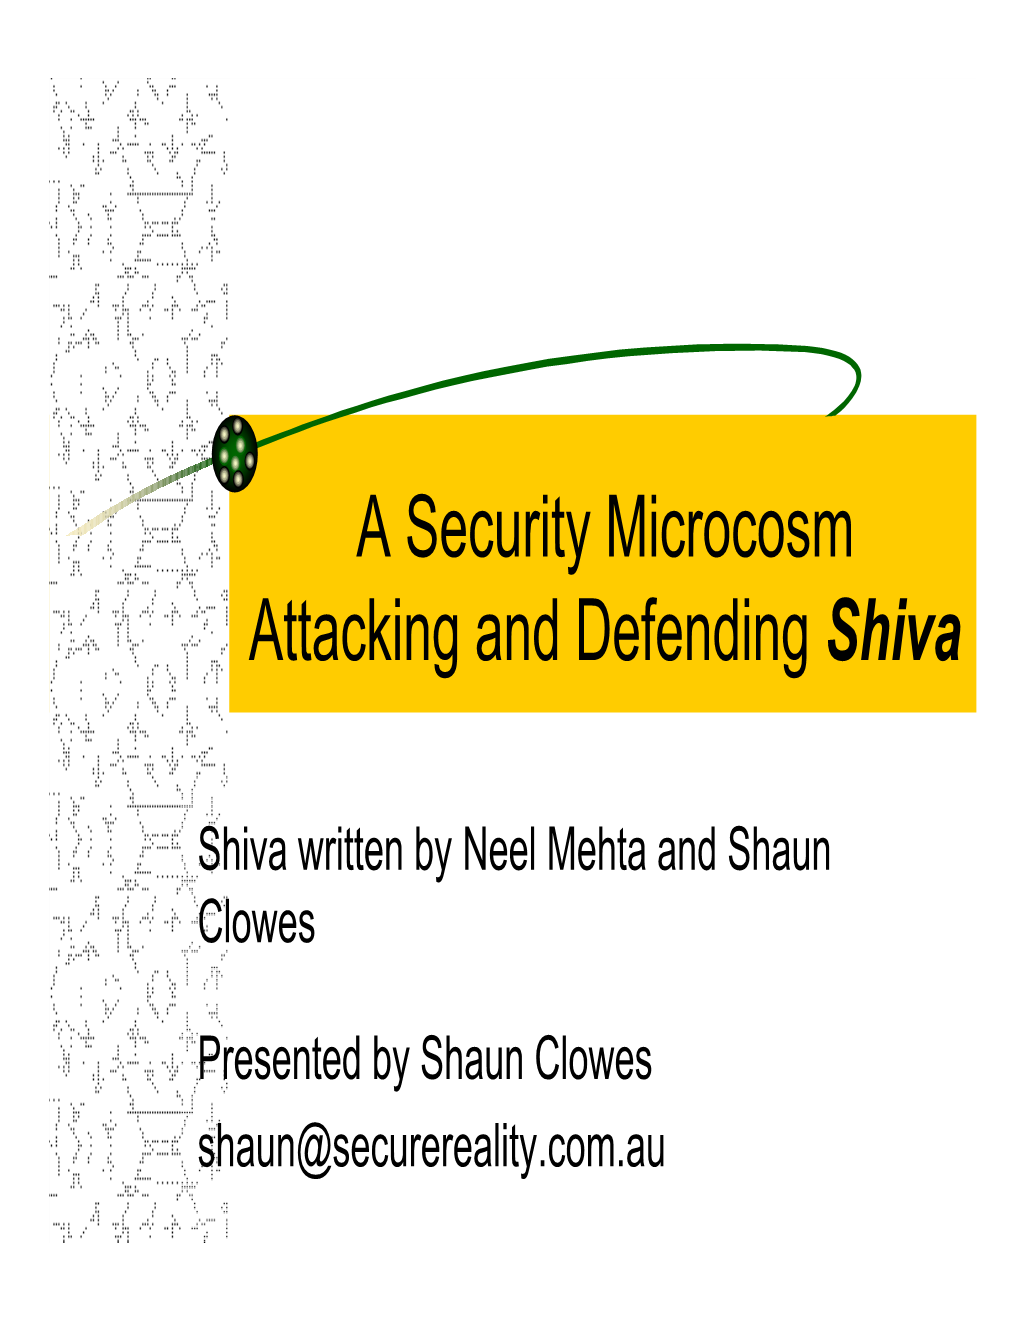 A Security Microcosm Attacking and Defending Shiva